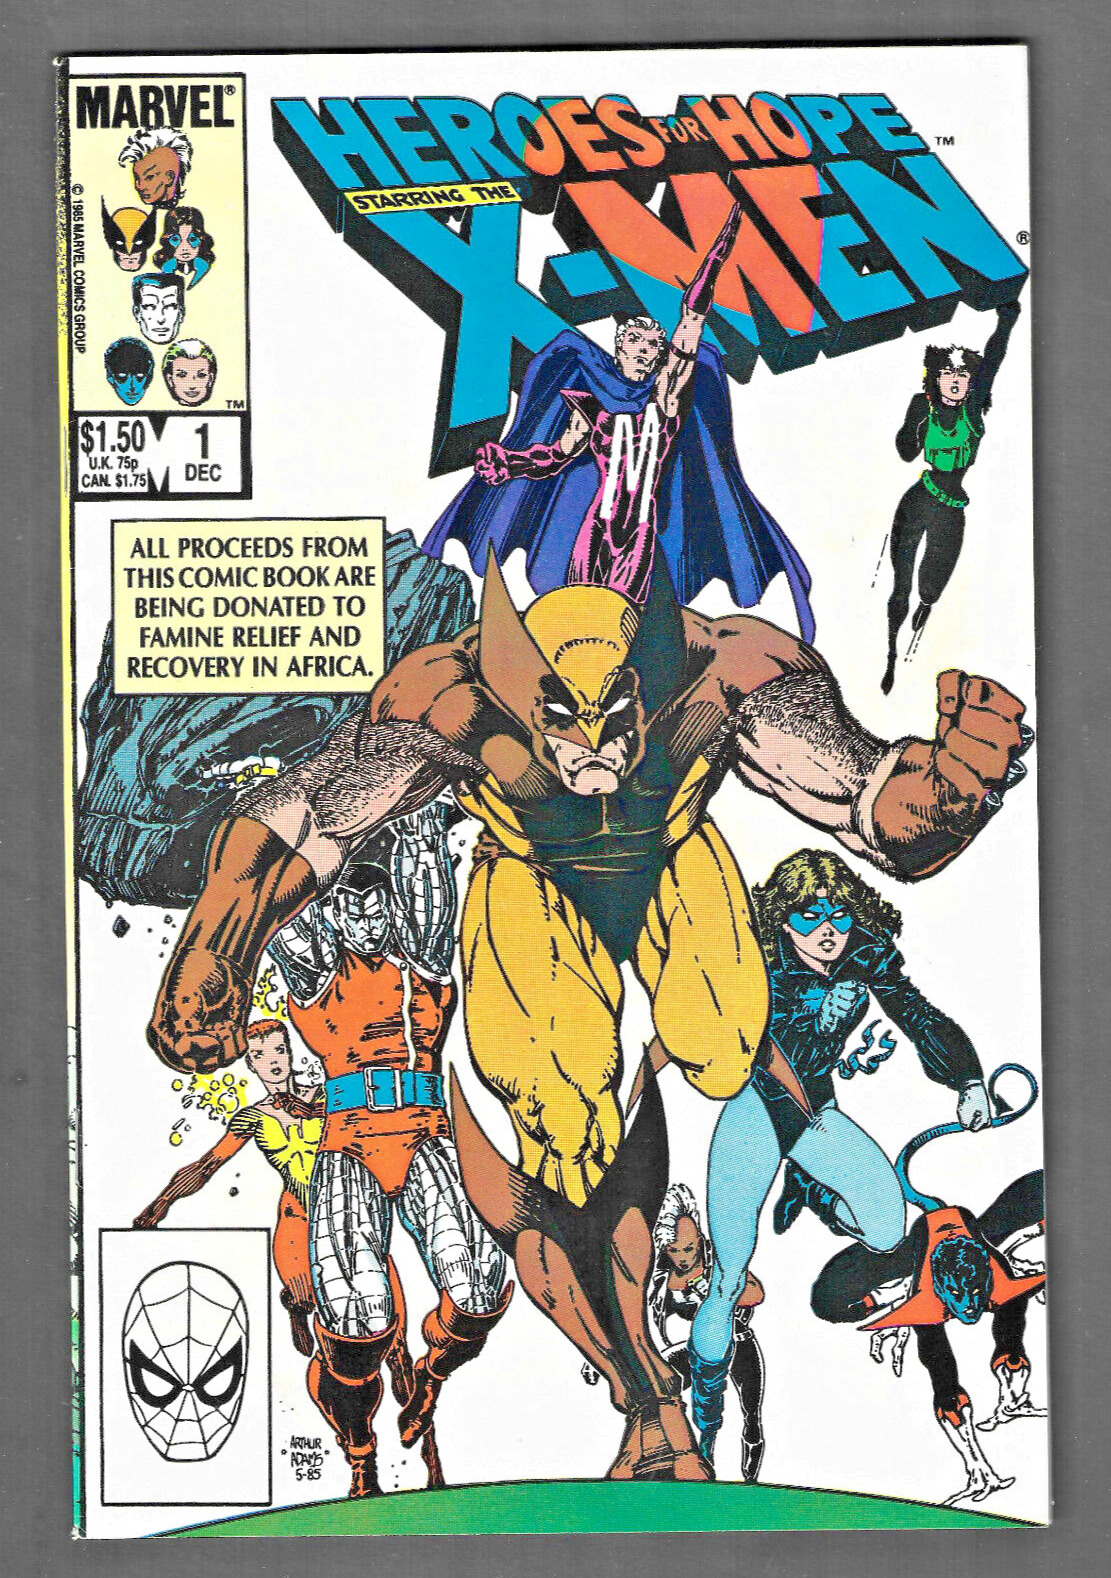 Heroes for Hope Starring The X-Men #1 Direct Variant 1st App. Hungry VF/NM (9.0)